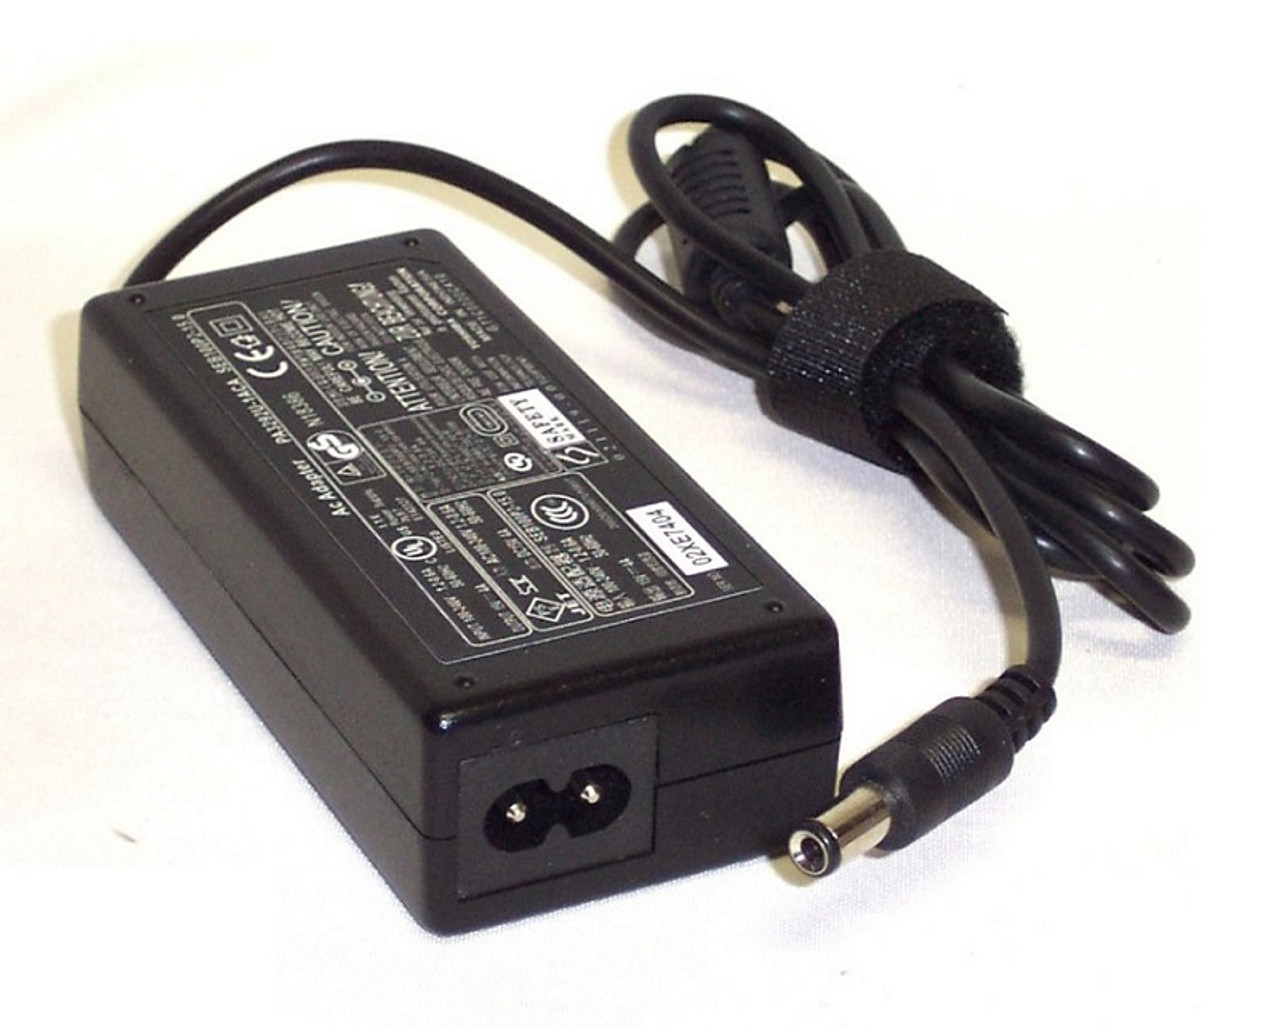 H2479 - Dell Auto Air Adapter includes AC Powercord 12v DC cable Adapter